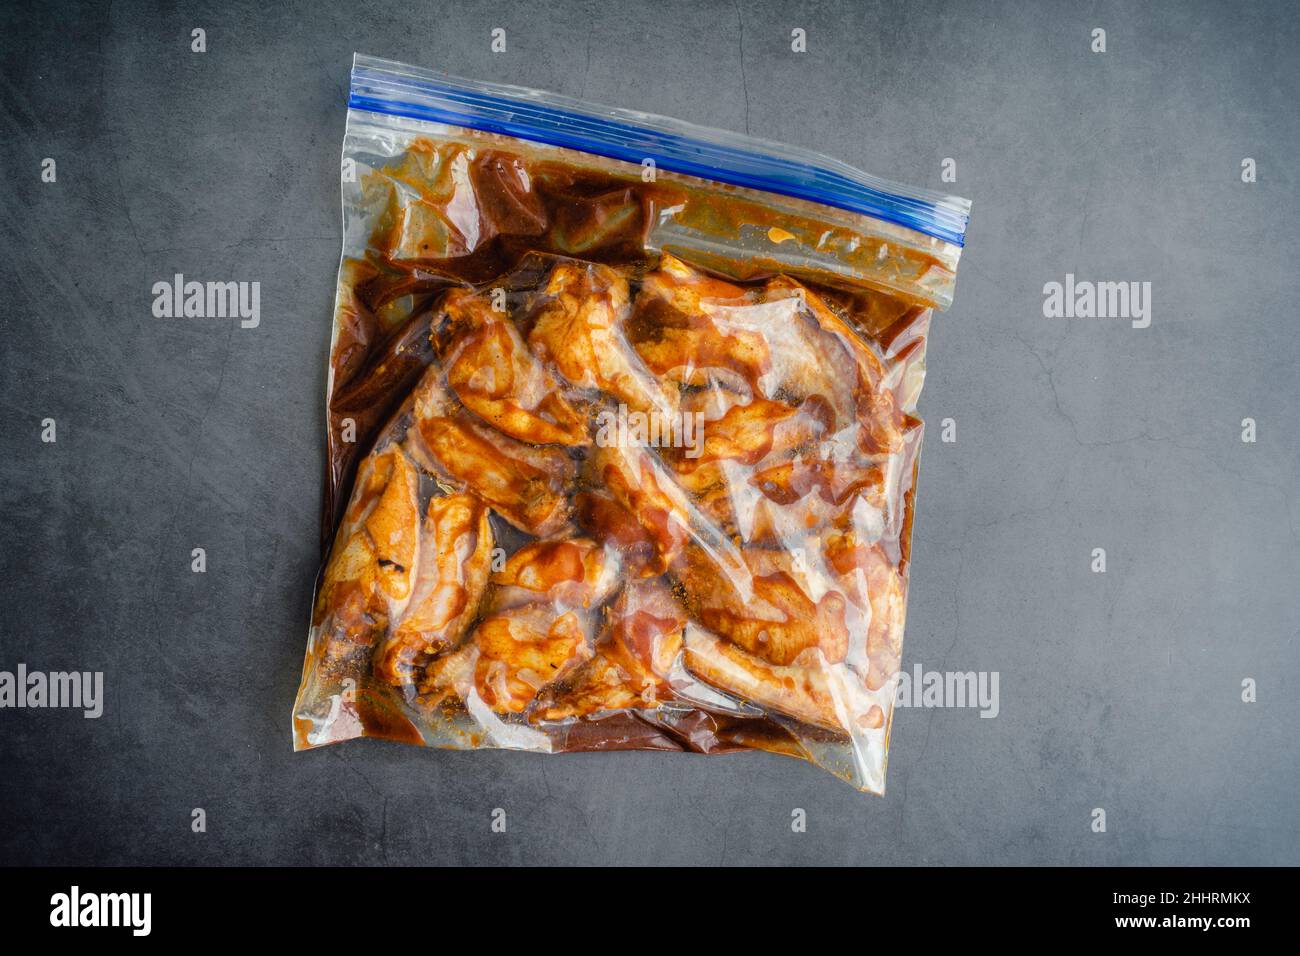 Raw Chicken Wings Marinating in a Plastic Bag: Uncooked chicken wings and marinade in a ziplock bag Stock Photo